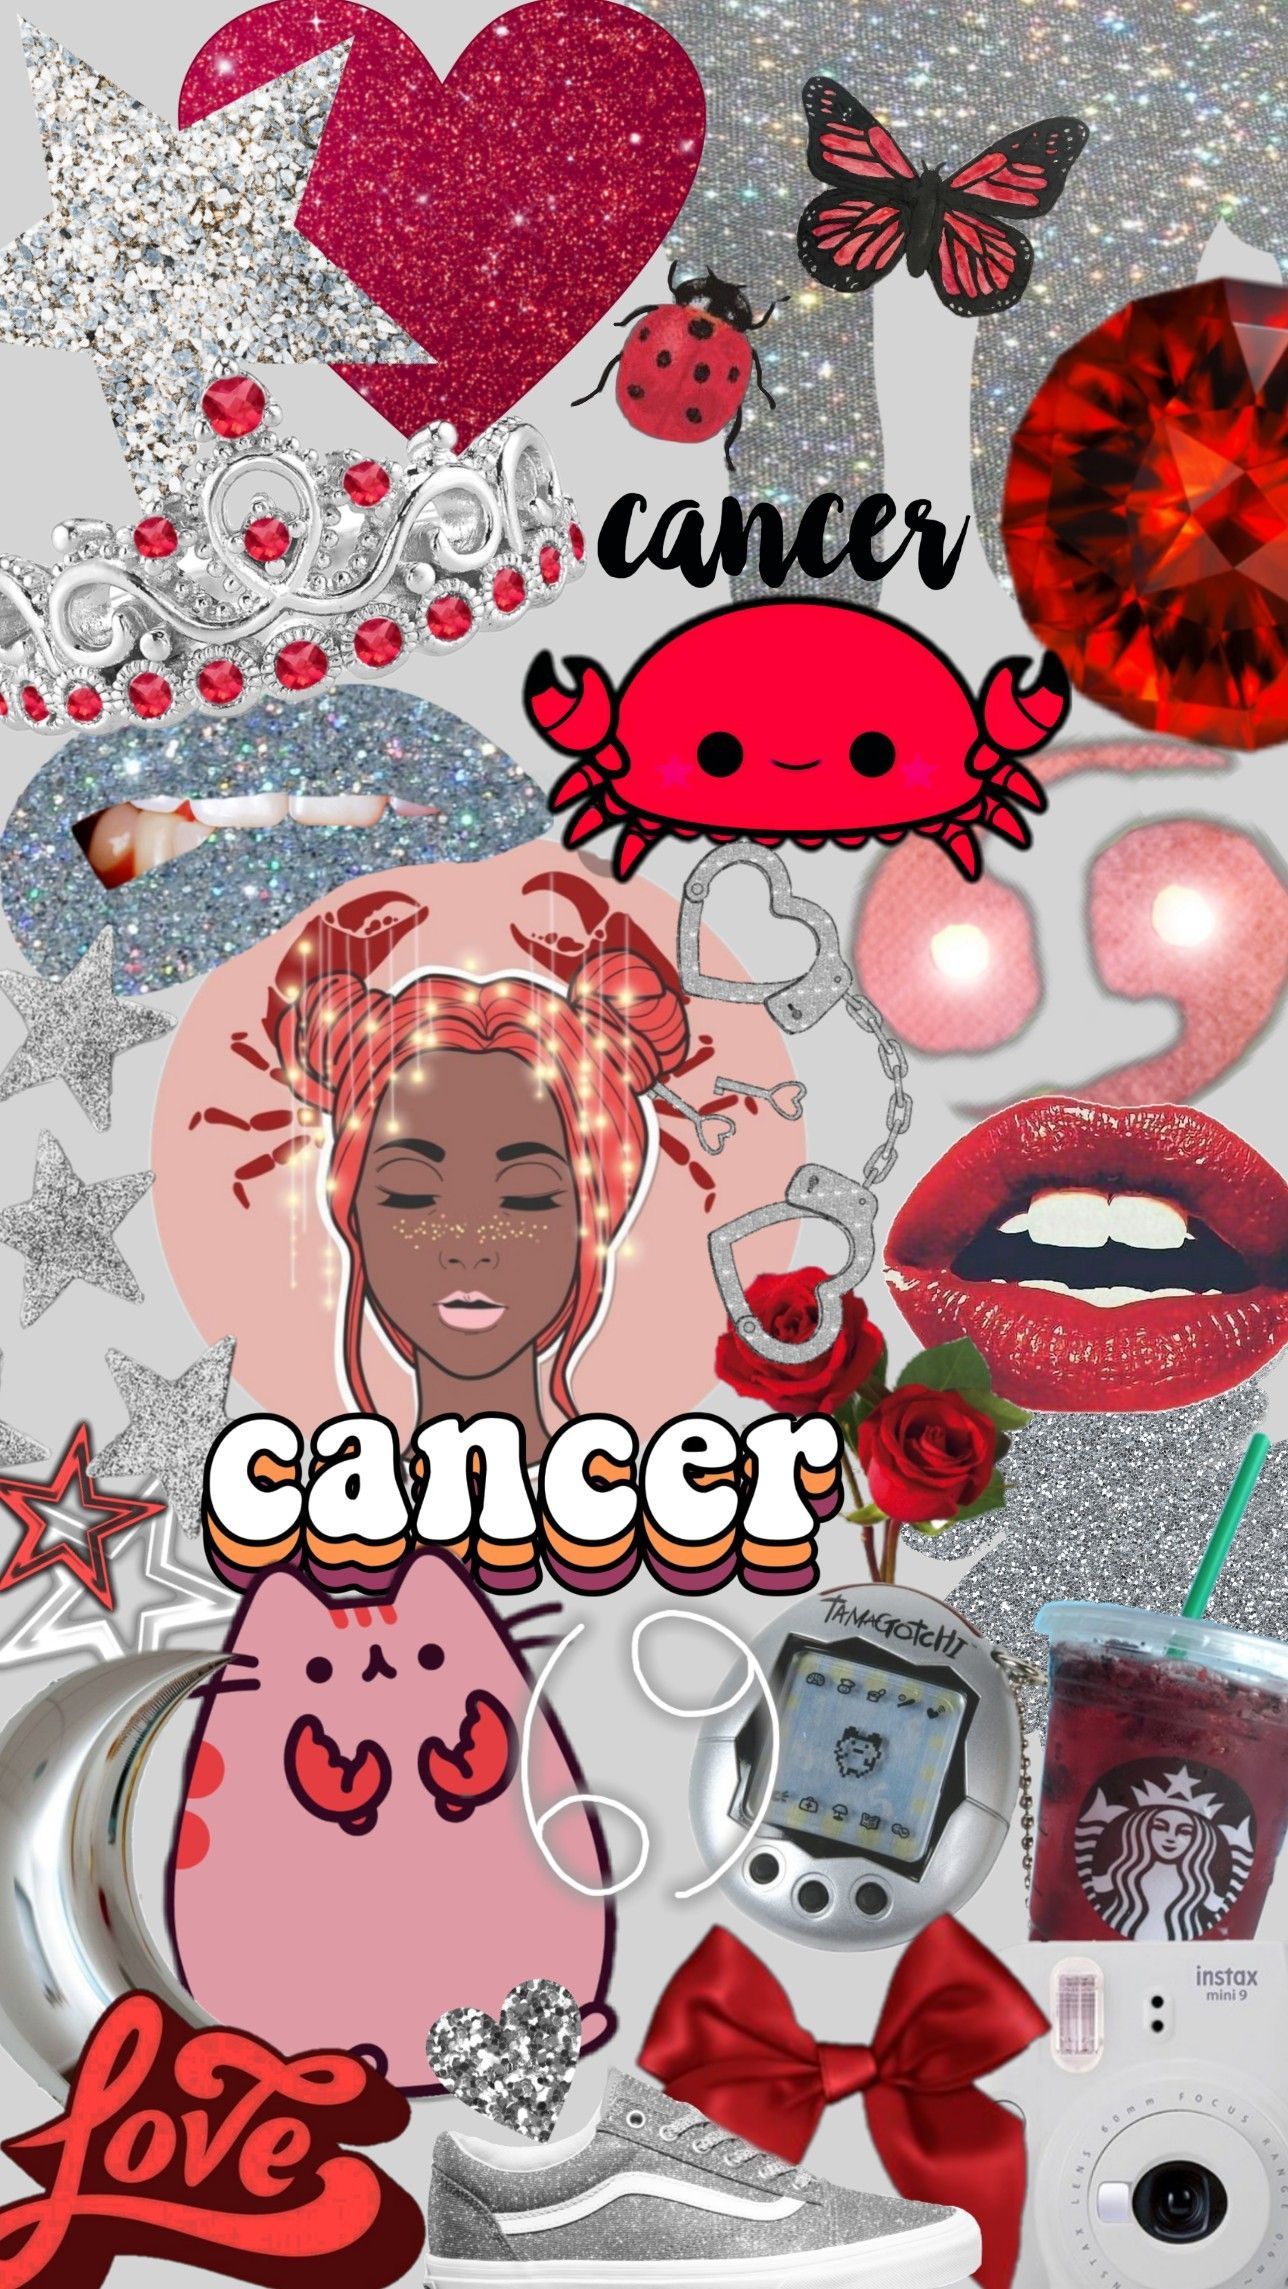 27 Cancer Pictures  Download Free Images  Stock Photos on Unsplash